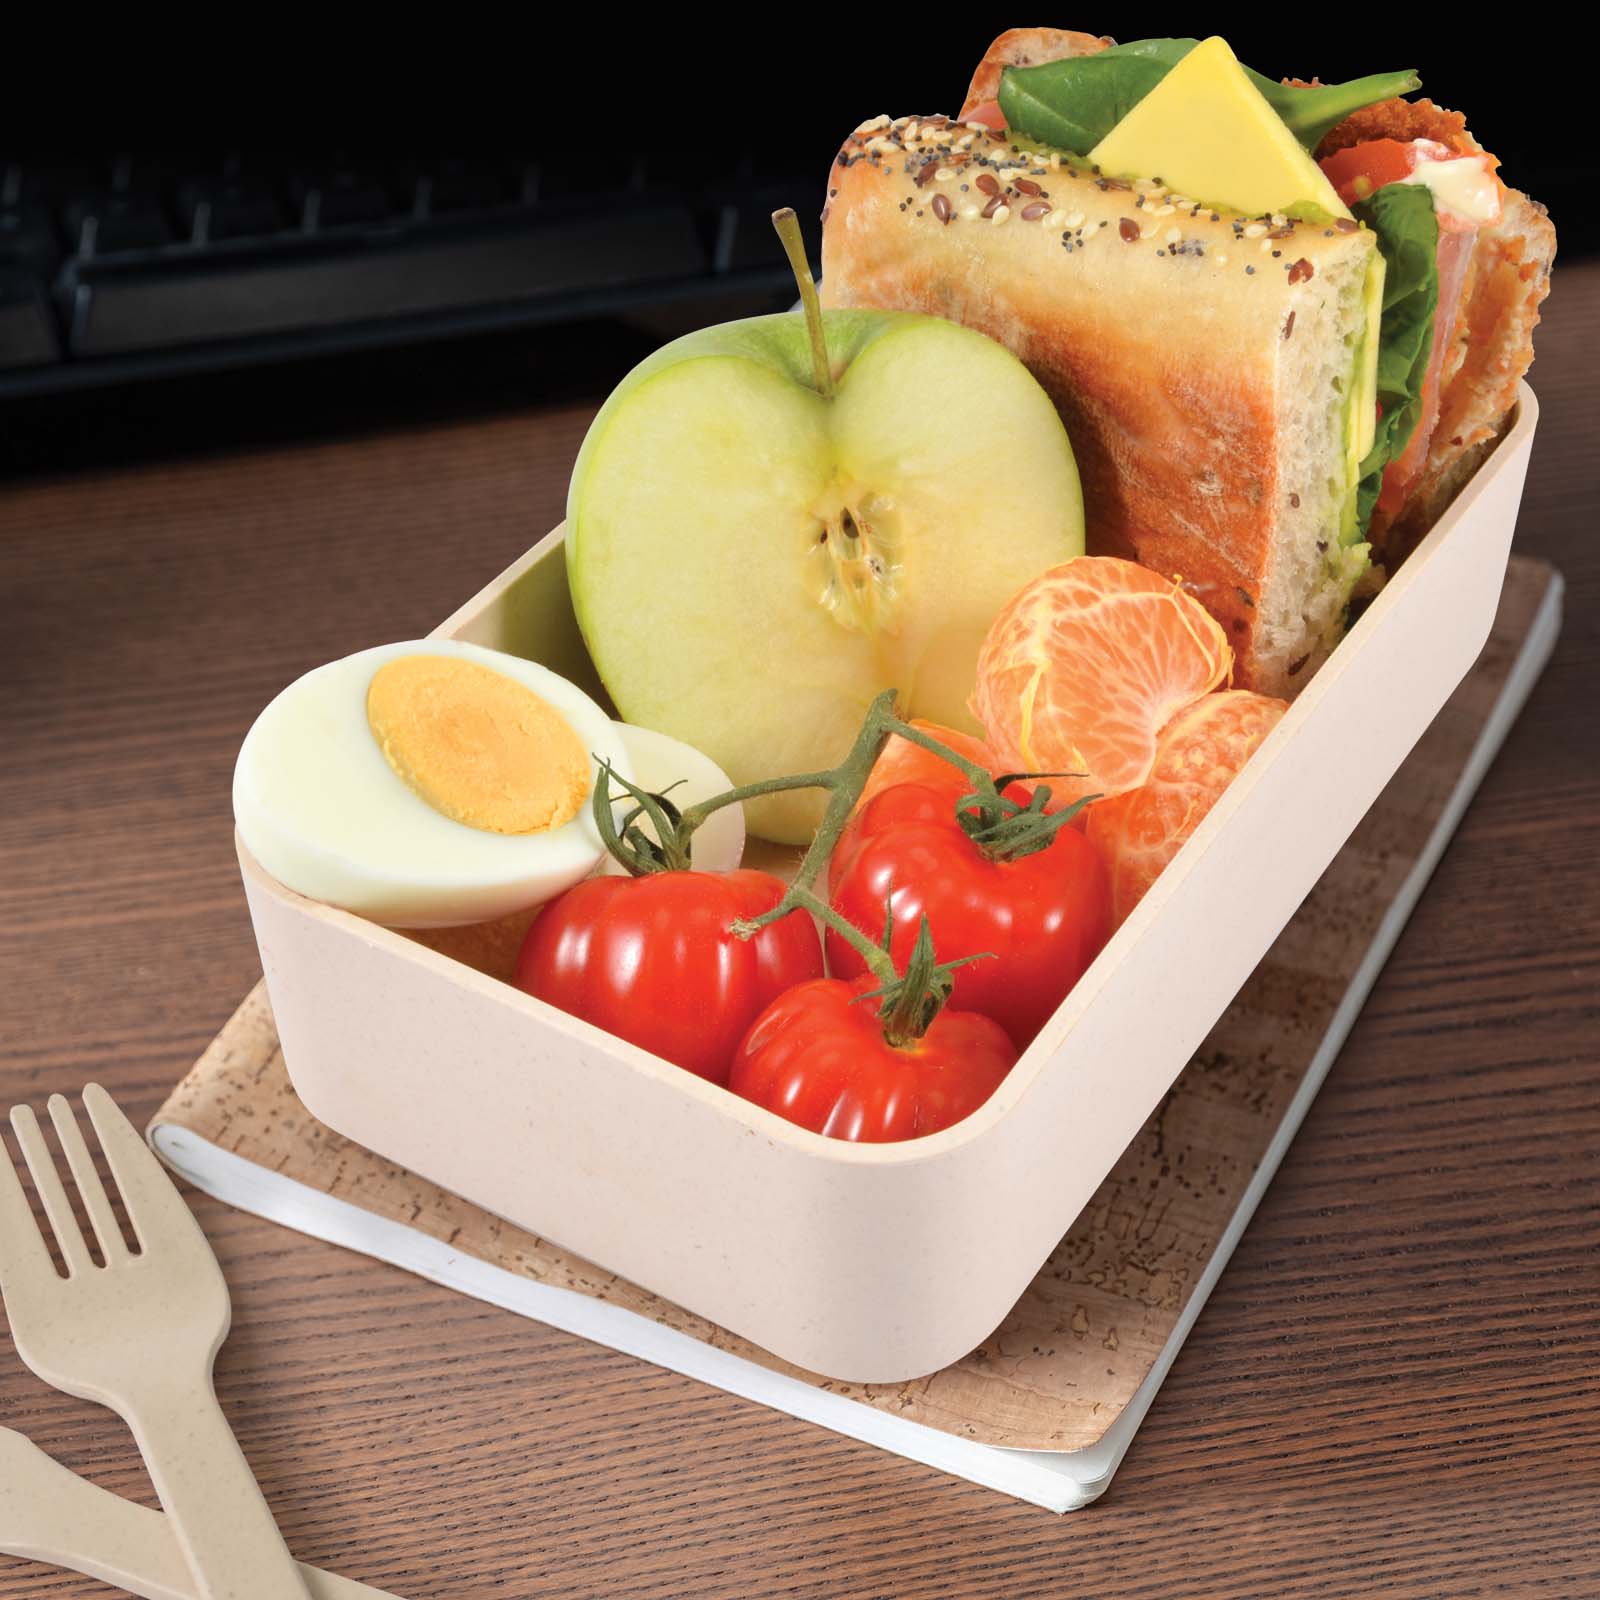 Stax Eco Lunch Box Features